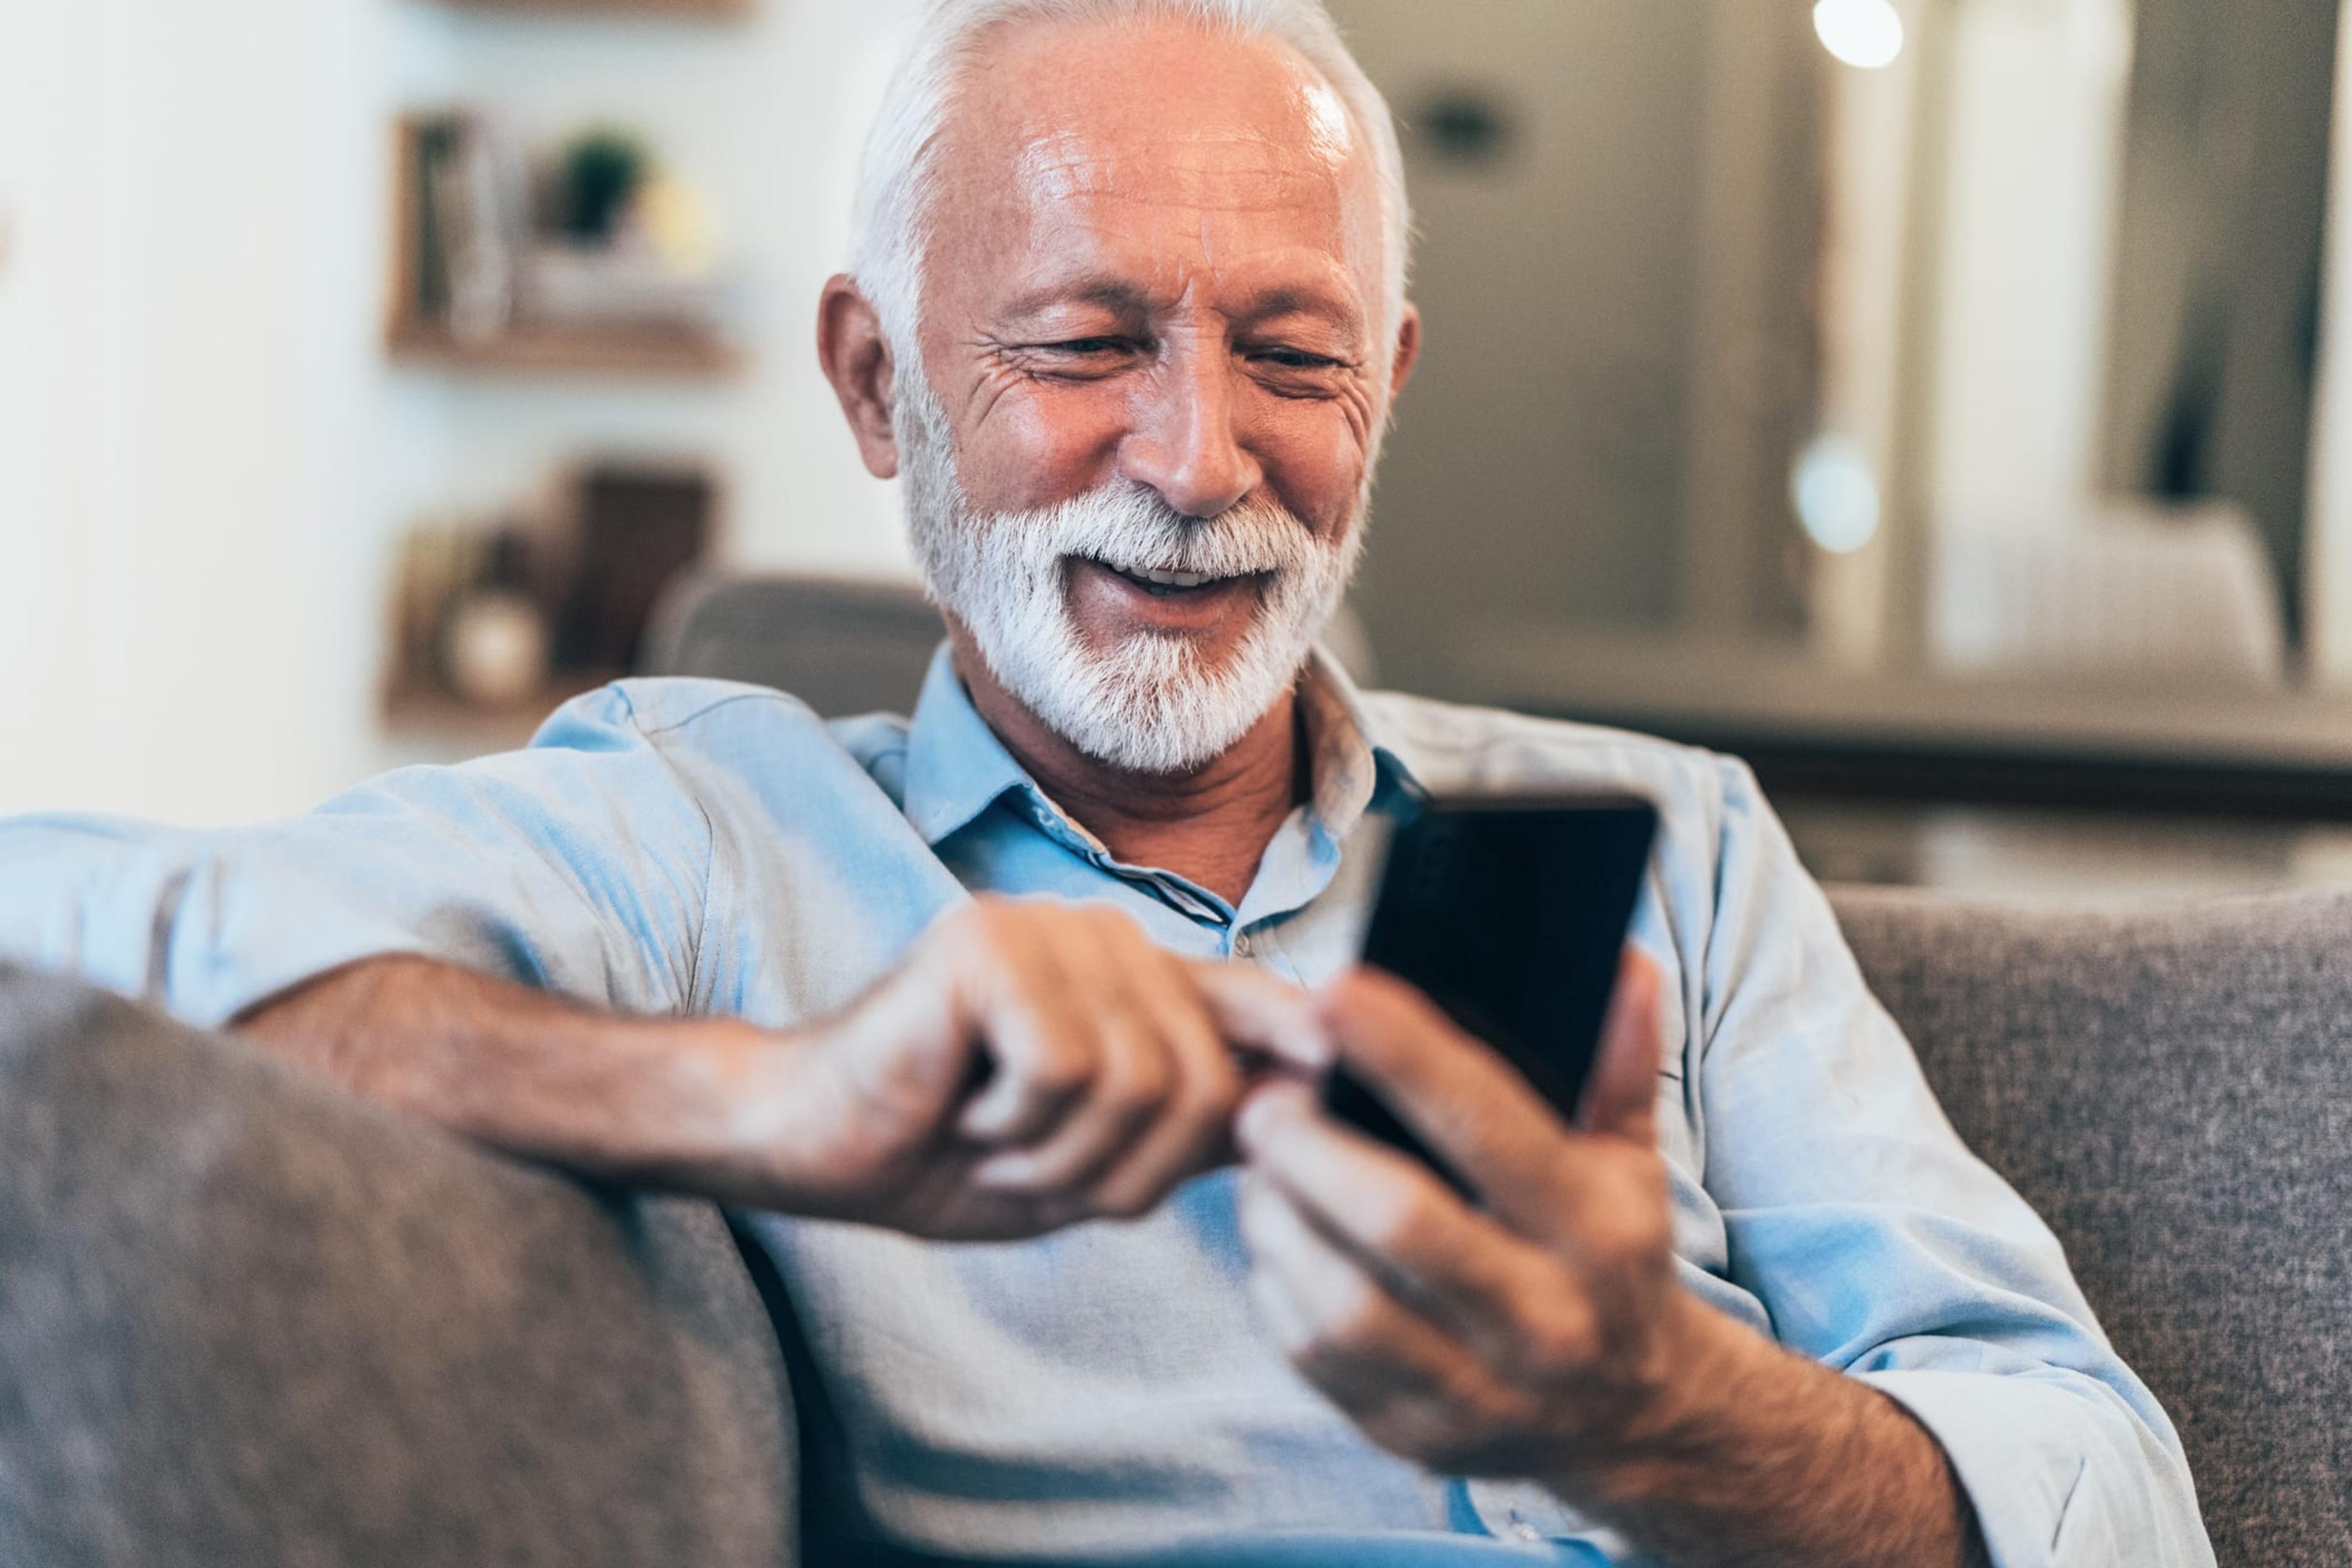 Grey-haired man uses his cell phone while sitting on the couch